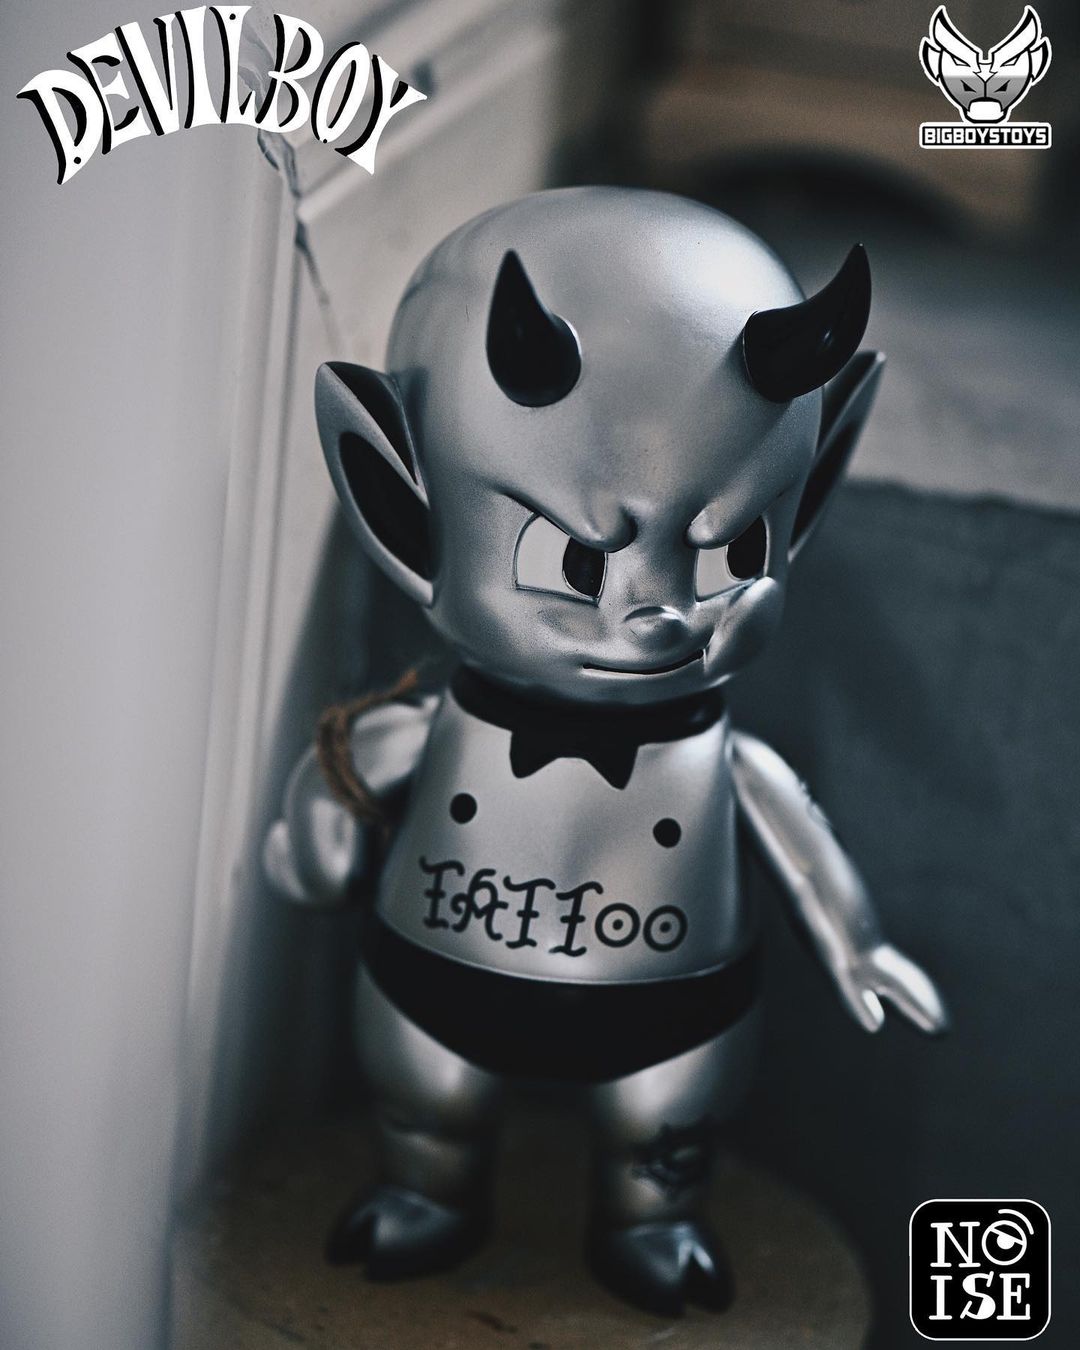 The Devil Boy Noise x Bigboystoys - The Toy Chronicle